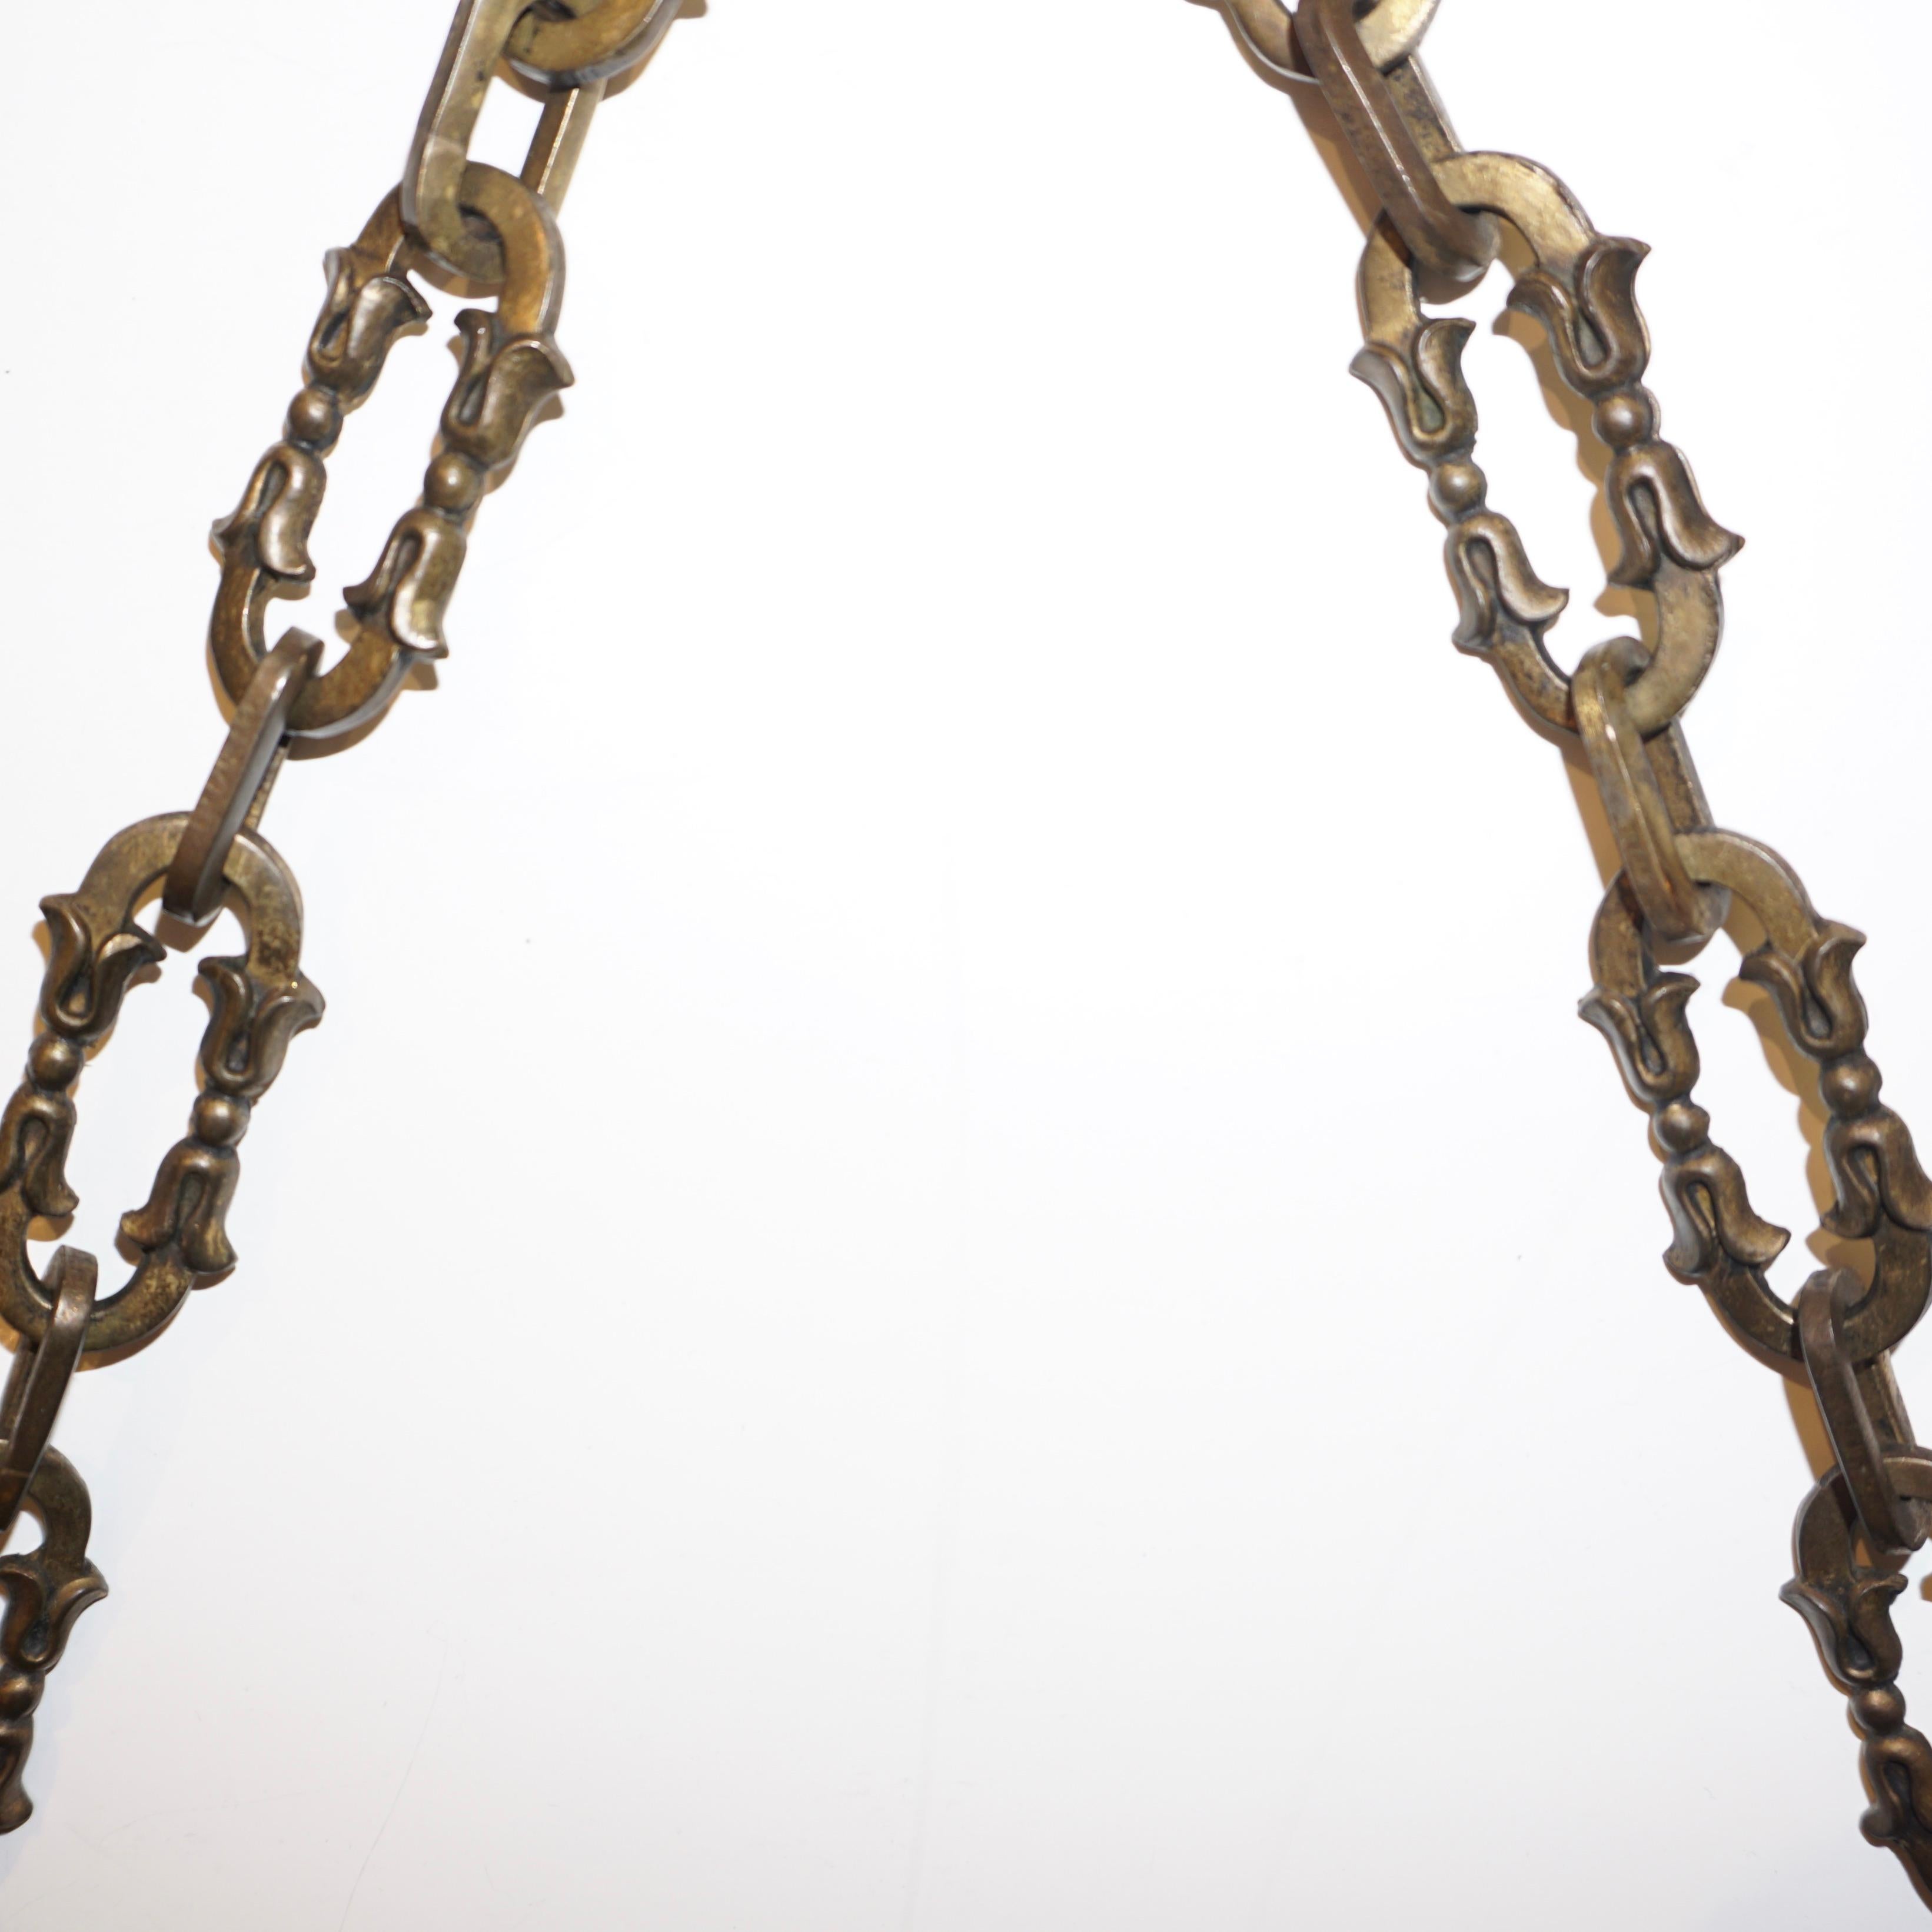 Hand-Crafted 1950s Vintage Italian Chain Hanging & Chased Bronze Round Mirror with Knot